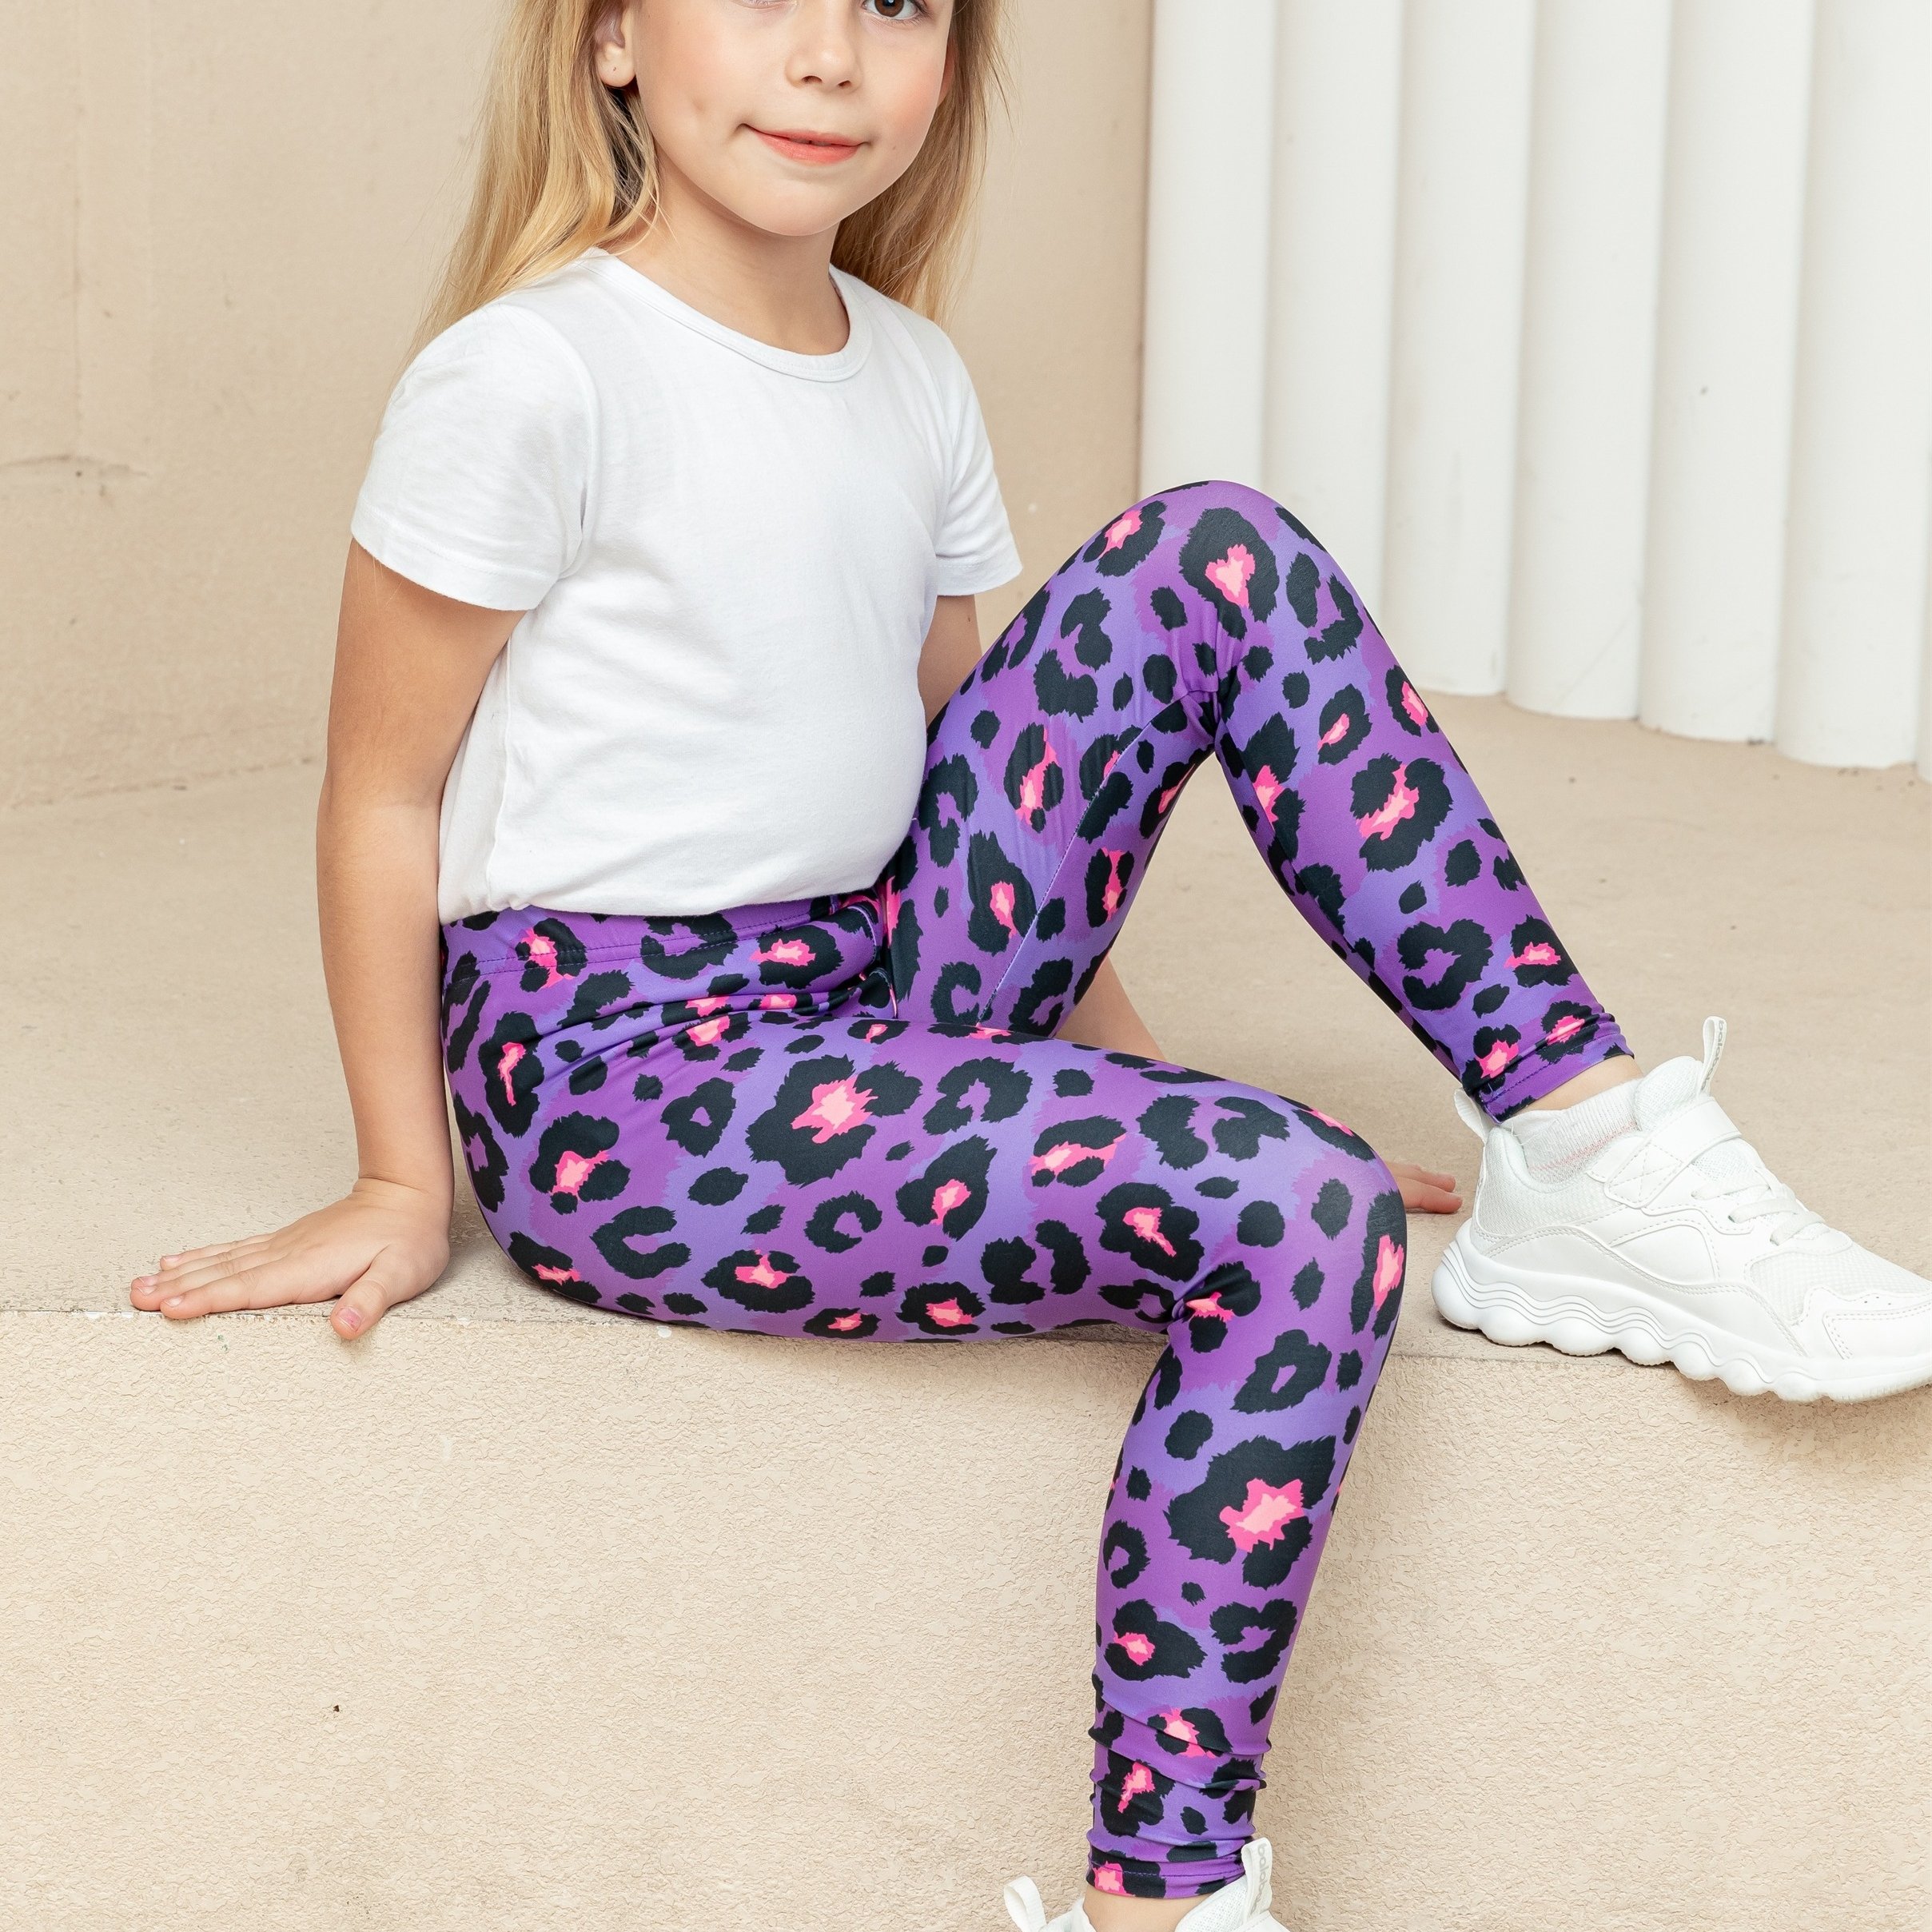 Multipack - Young Girls Fashion Leopard & Solid Basic Legging Pants,  Elastic & Comfortable Trousers Set